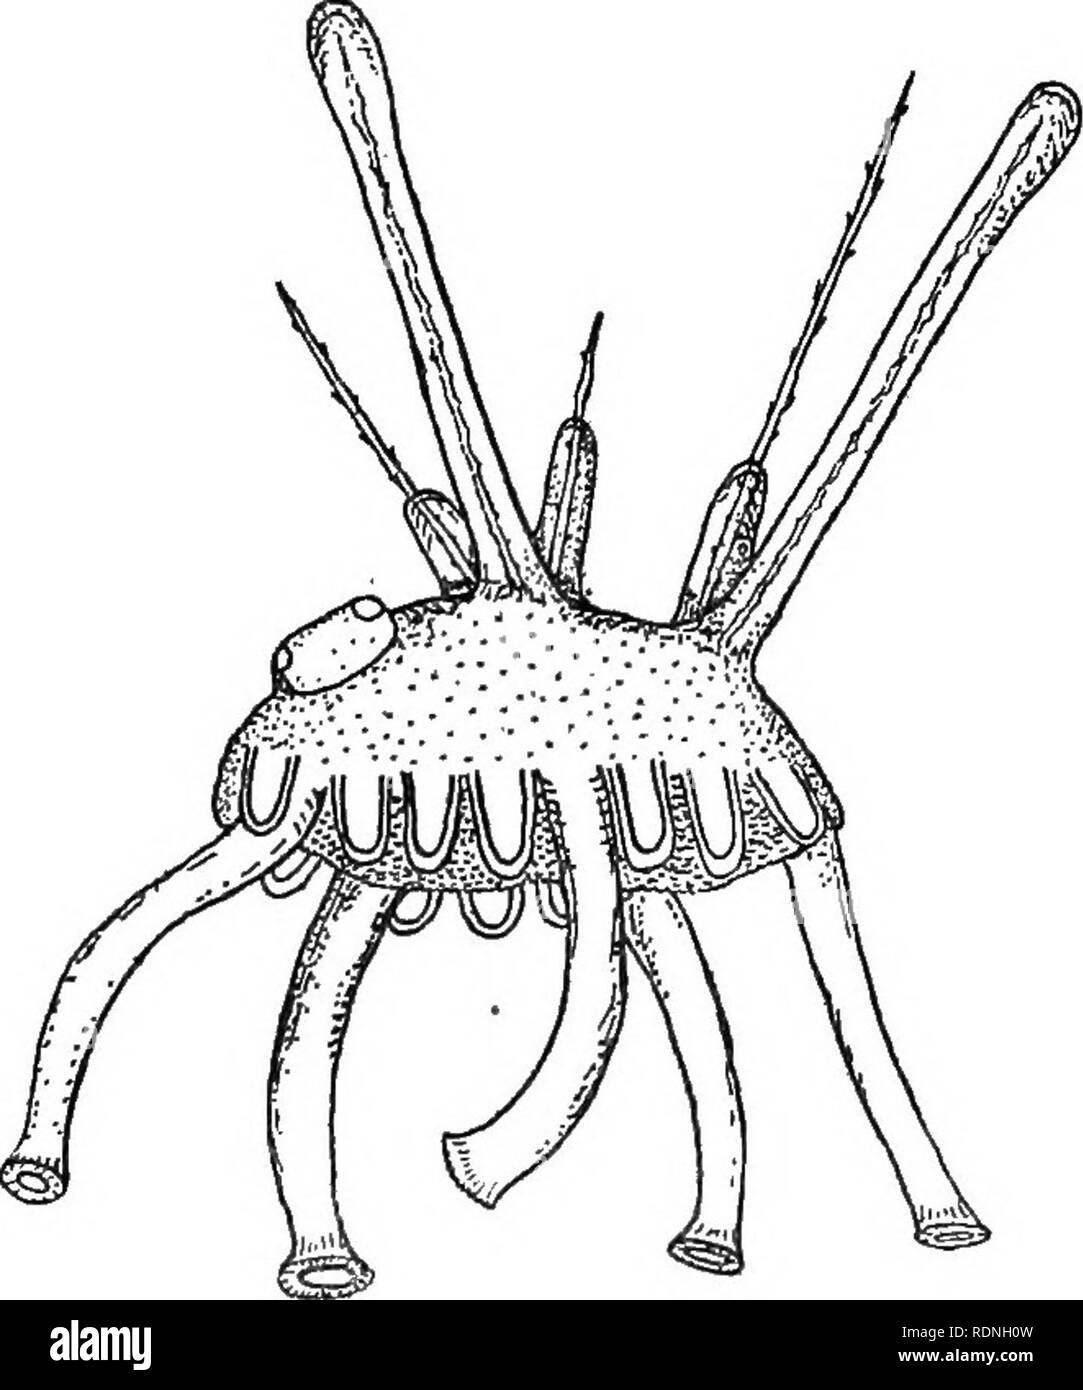 . Echinoderms of Connecticut. Echinodermata. No. 19.] ECHINODERMS OF CONNECTICUT. 103 symmetrical, with both mouth and anus, and is known as a pluteus (Fig. 16). It bears absolutely no resemblance to the adult urchin. The free-swimming pluteus lives and feeds at the sur- face for a period of several weeks, the time depending some- what pn the temperature and other conditions, and varying in different species. In thiSj.time it may have been carried by cur- rents and tides to a considerable distance from its place of origin.. Fig. 17. Arbacia punctulata. Side view of young urchin immediately aft Stock Photo